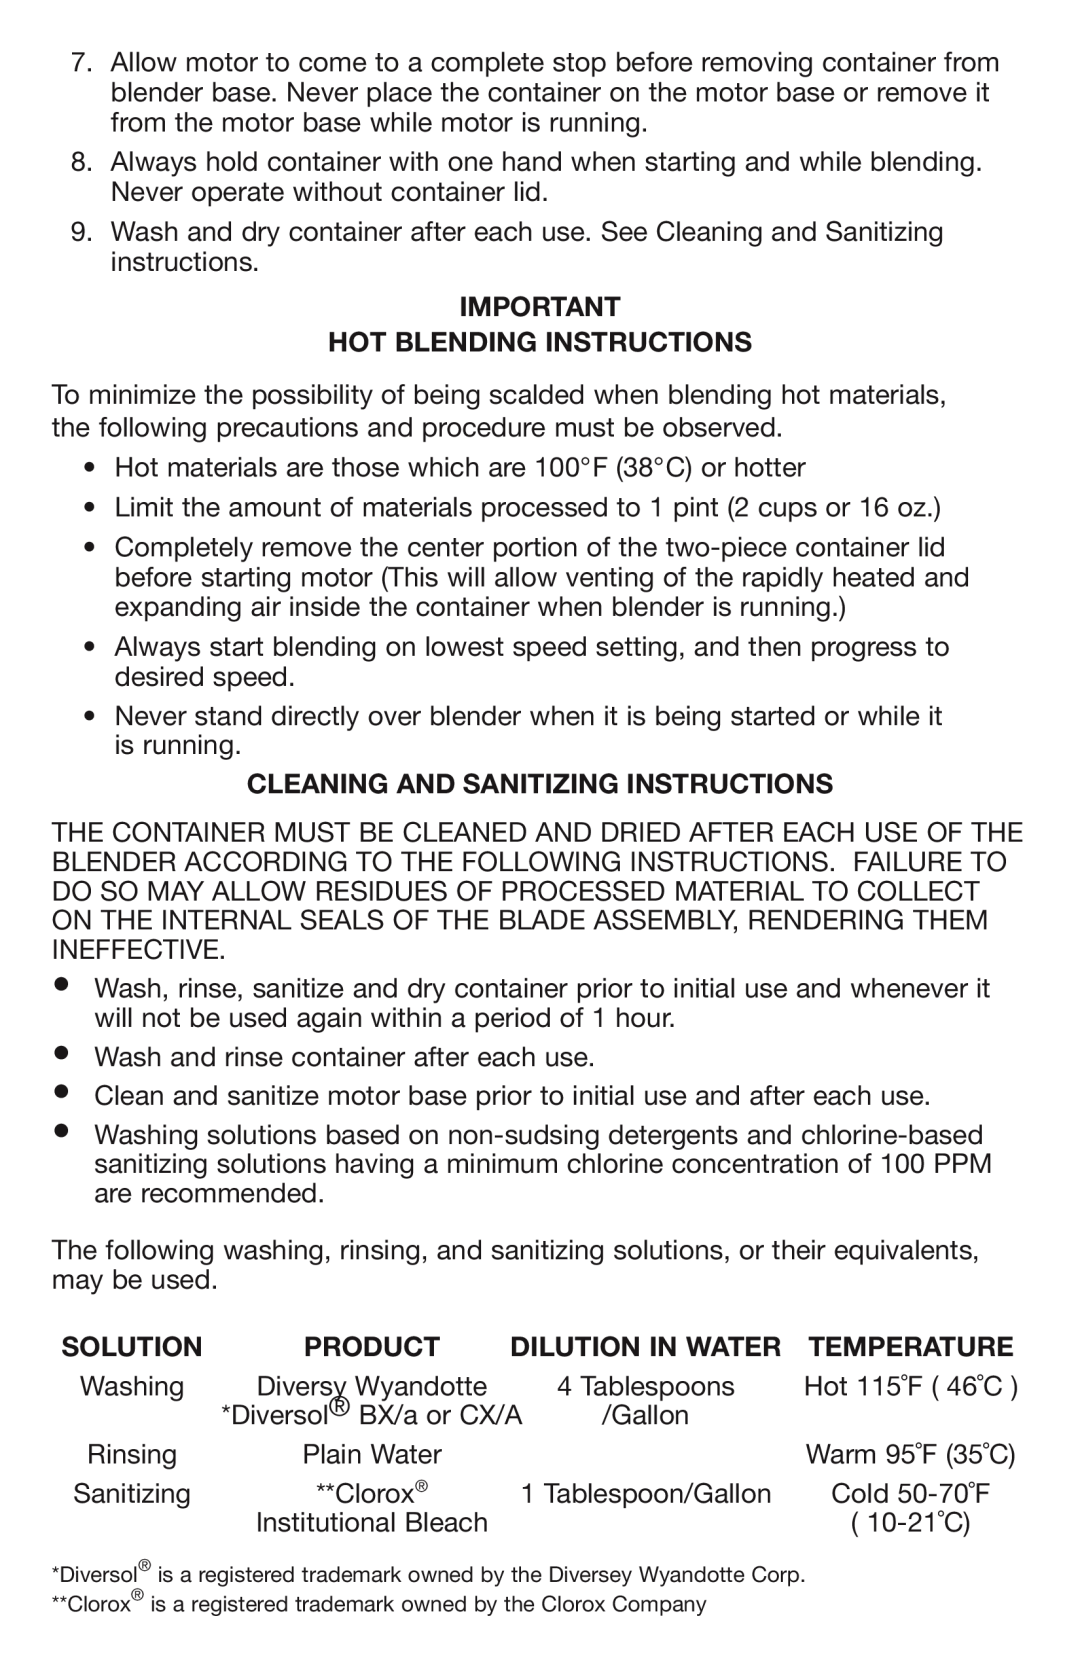 Waring MX1000R manual Hot Blending Instructions, Cleaning And Sanitizing Instructions, Solution, Product, Dilution In Water 